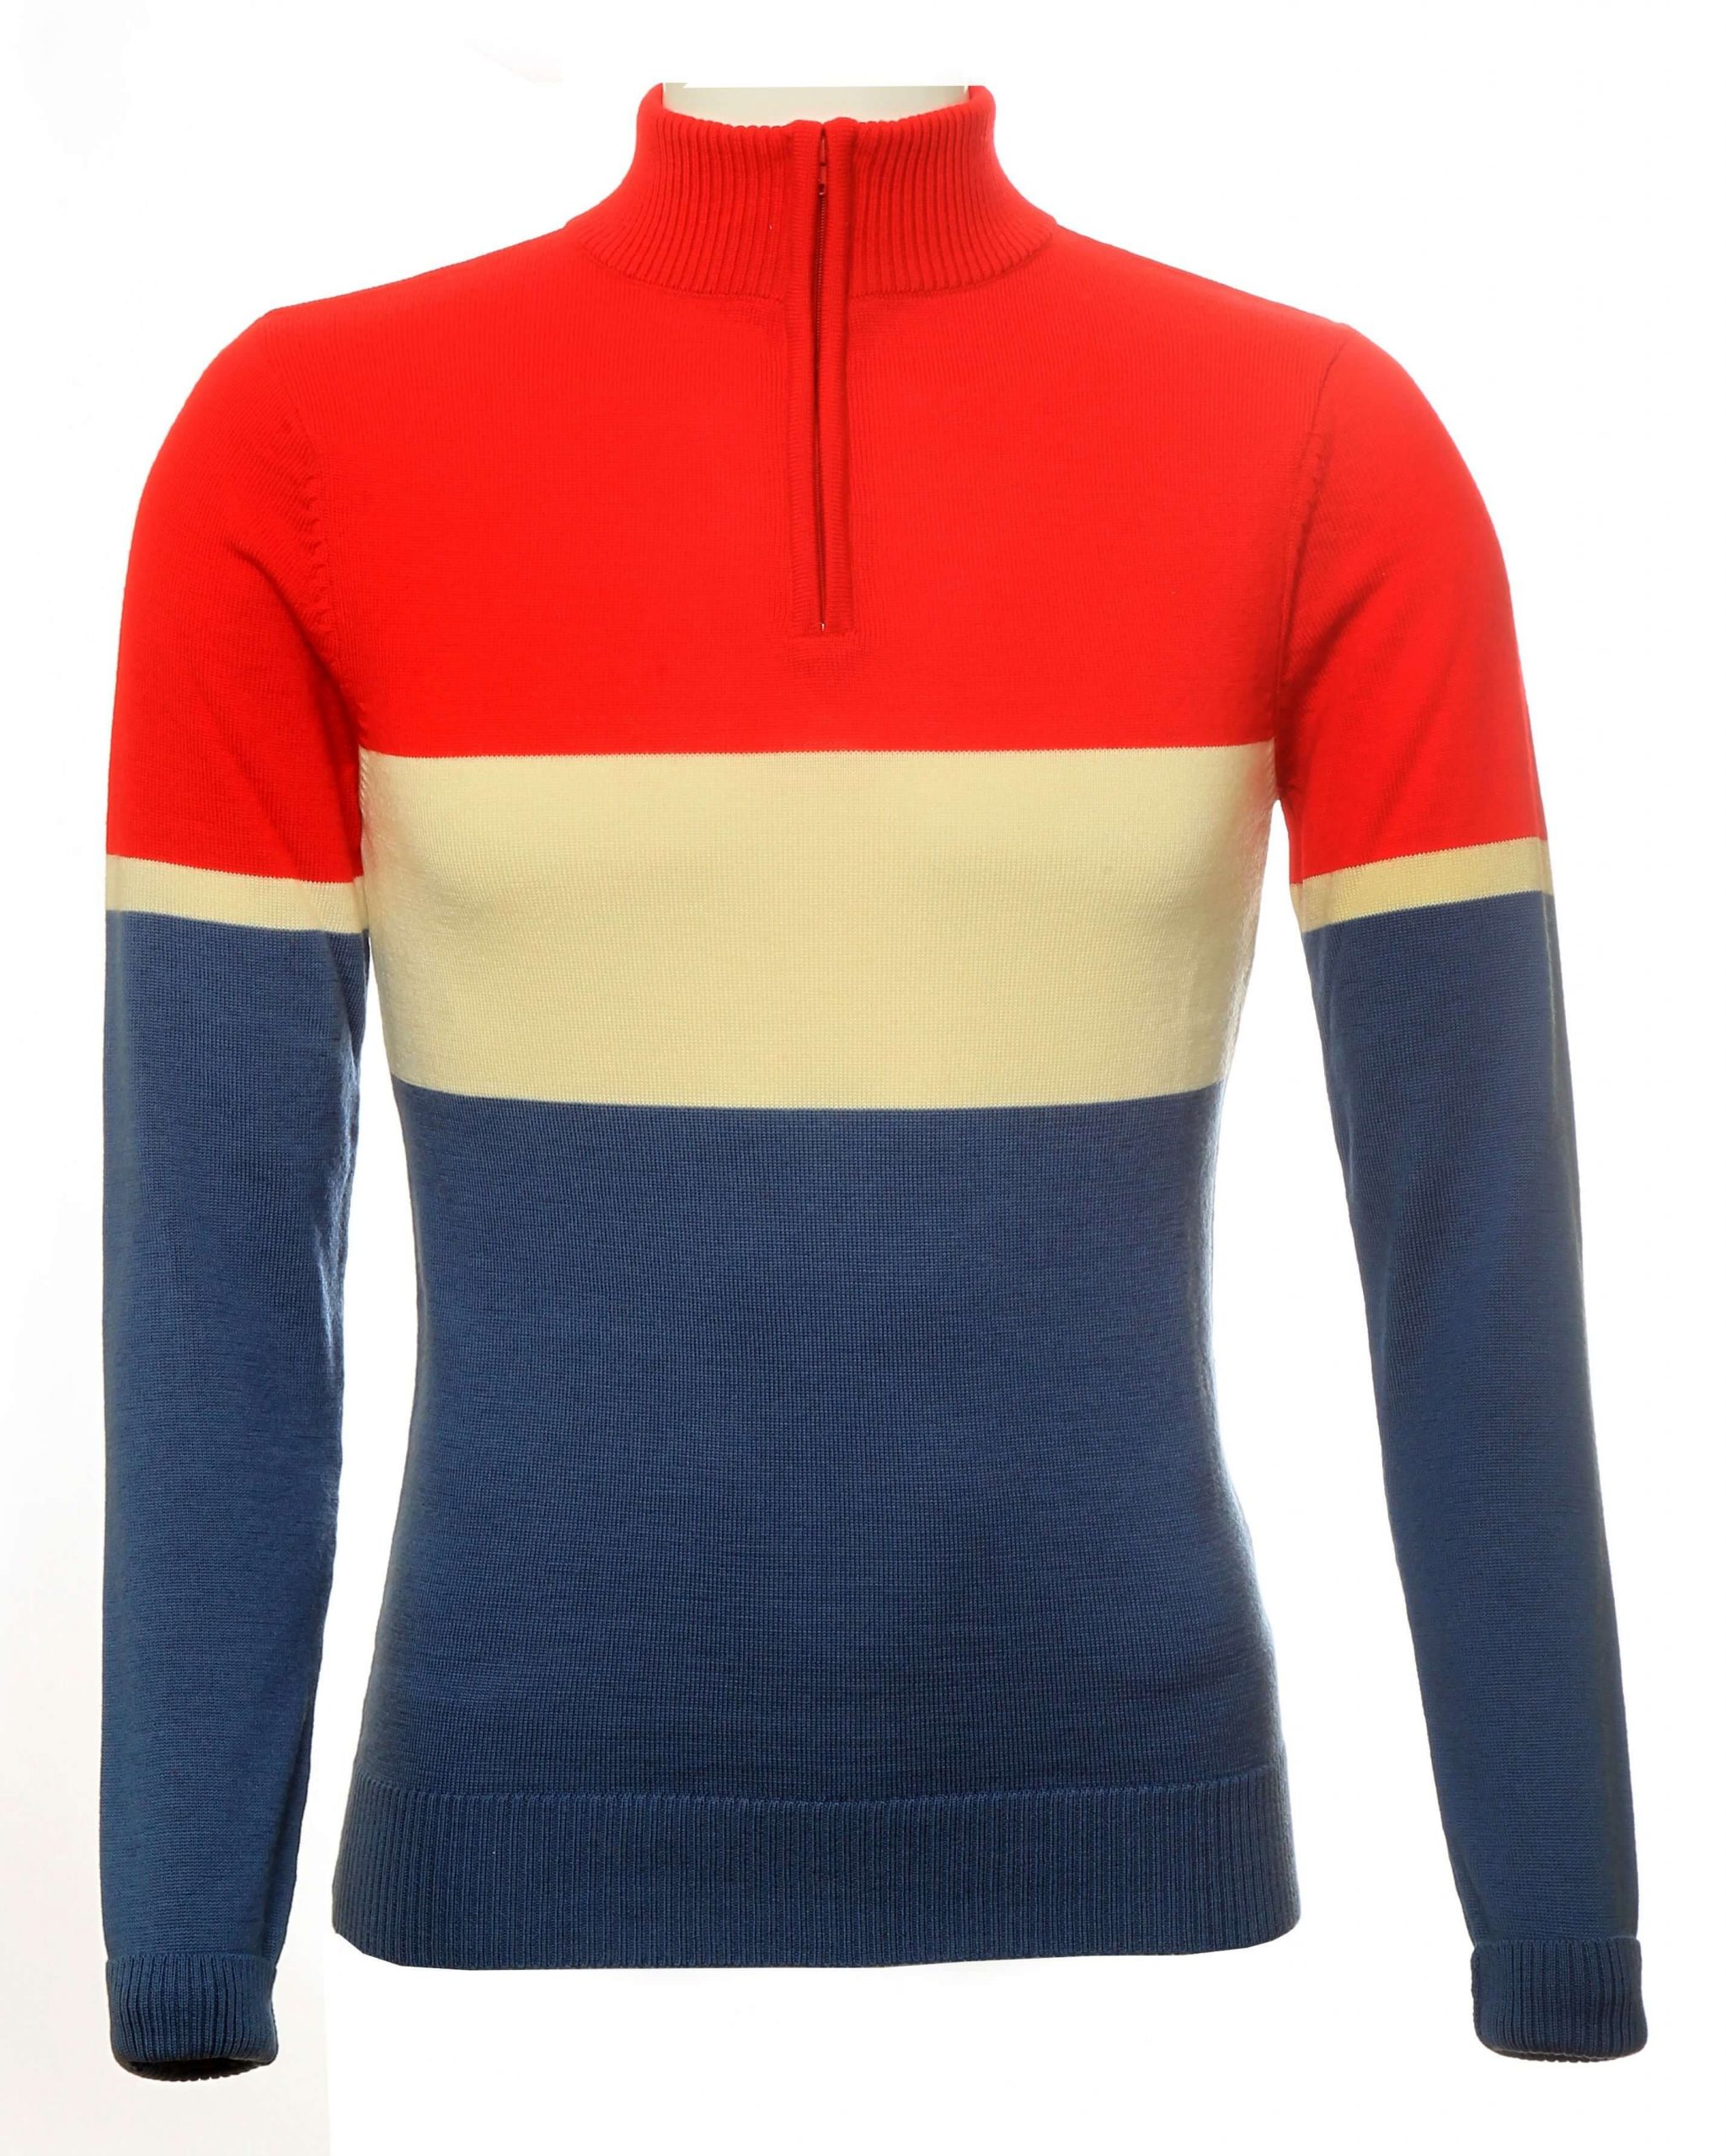 cycling jersey full sleeve